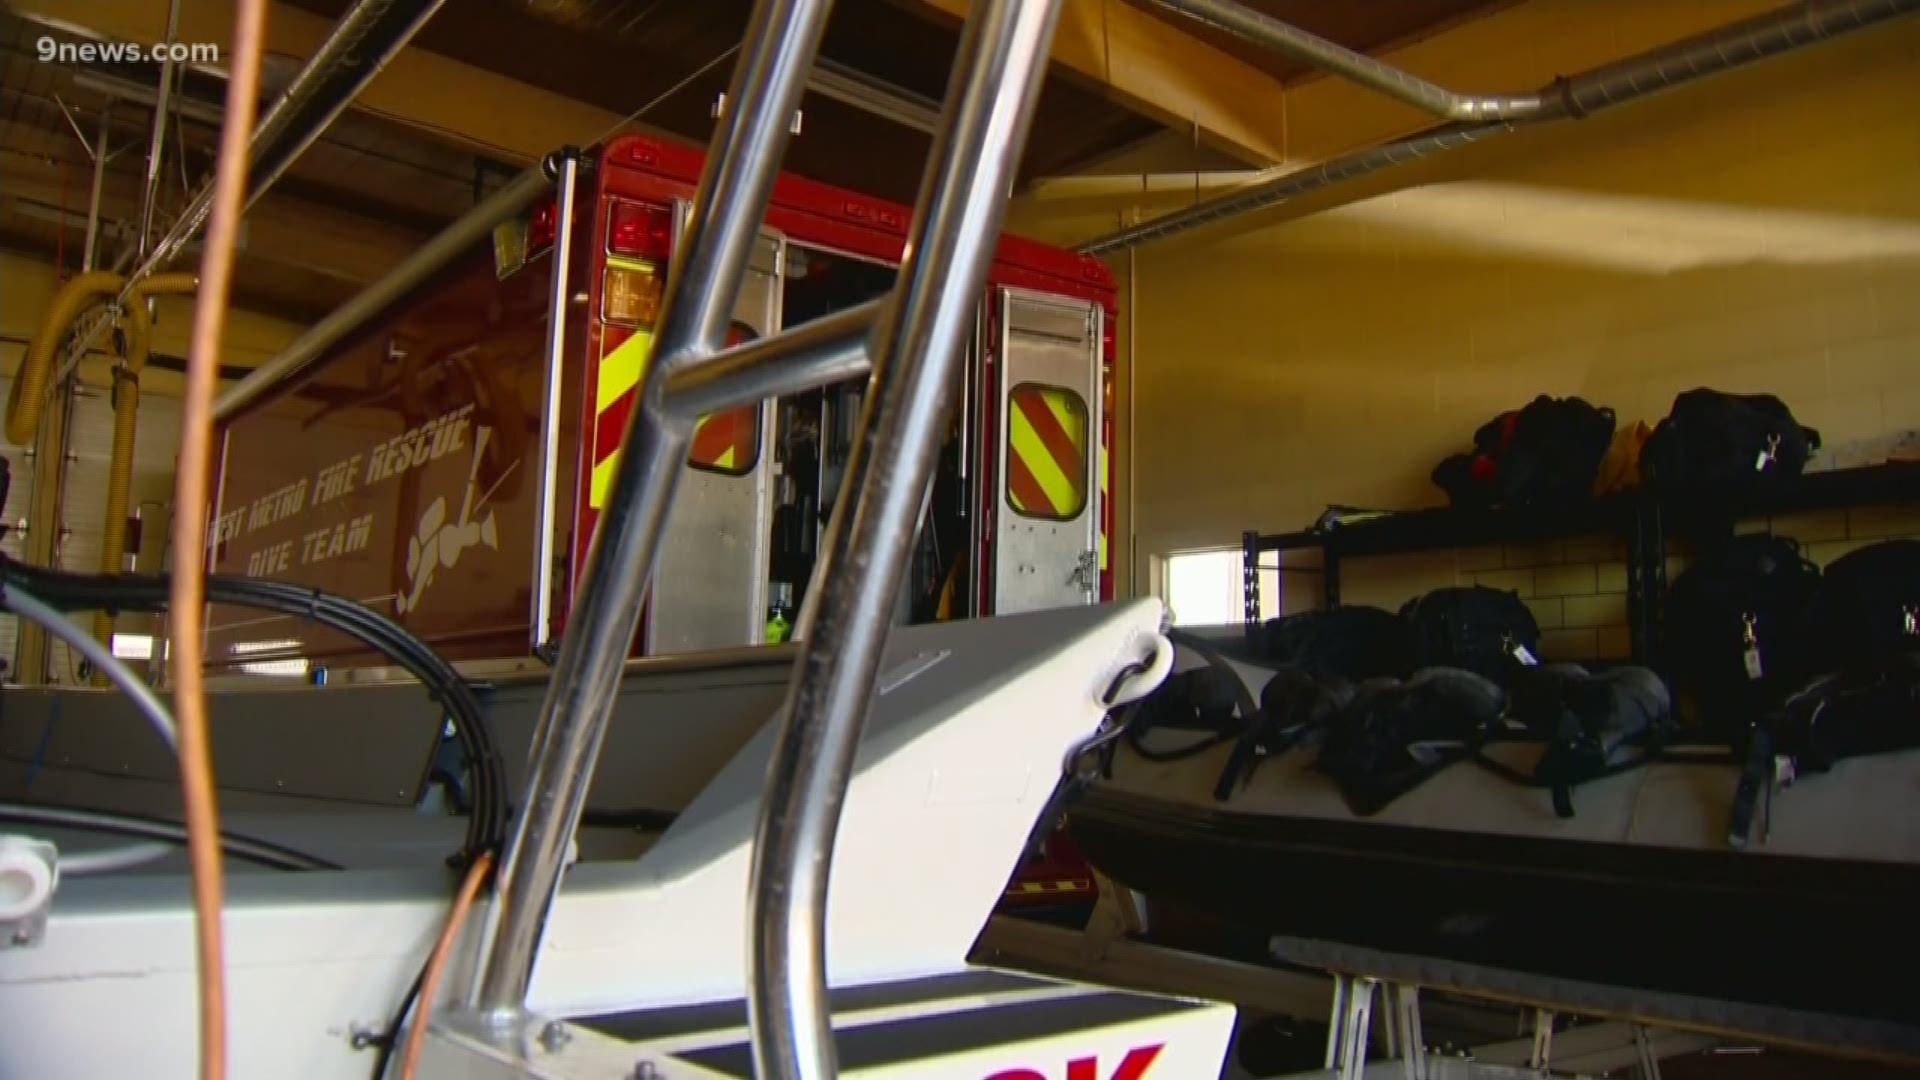 Rescue crews are working to help people who get in trouble on Colorado's full waterways.